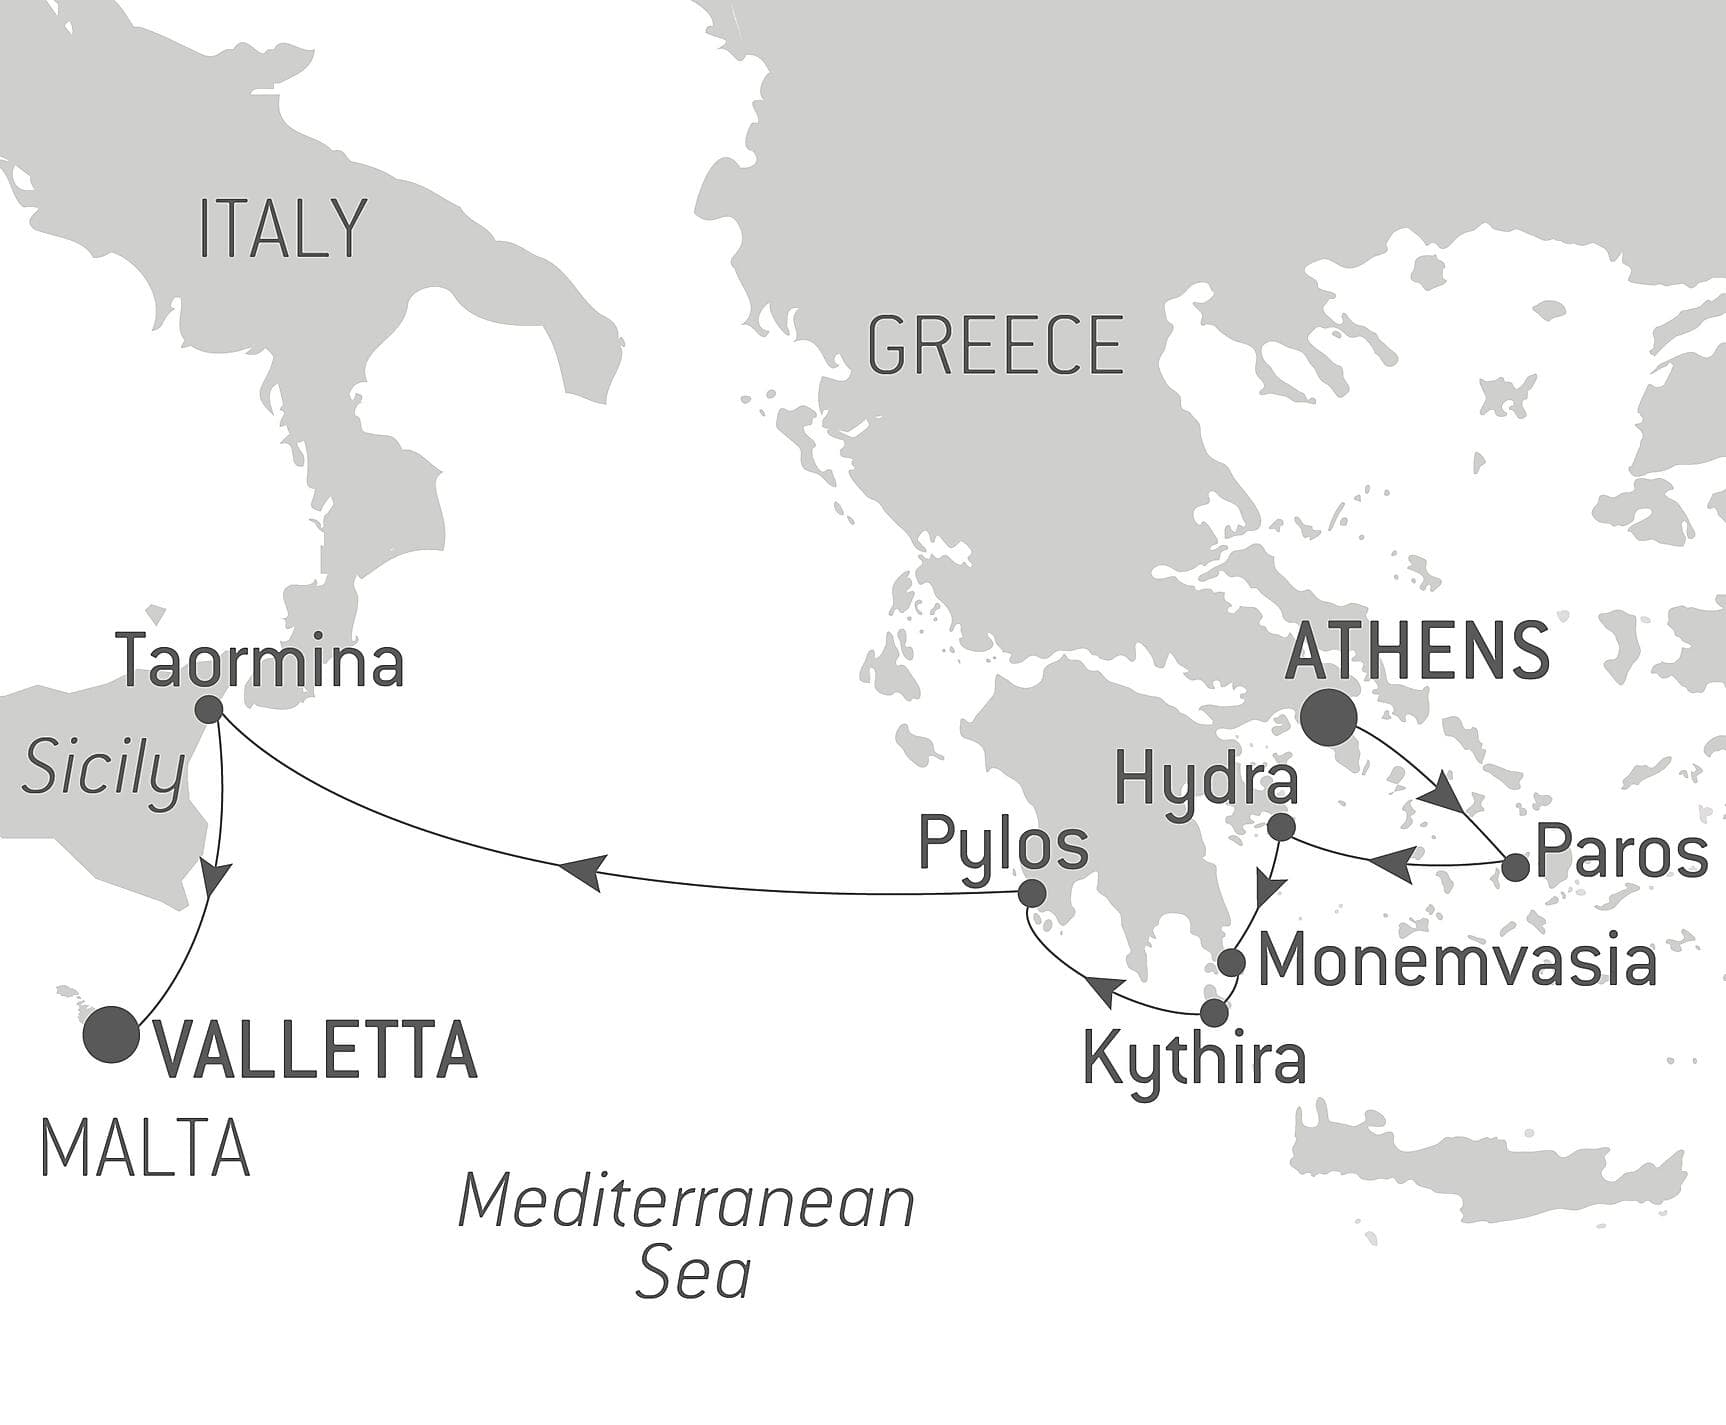 Islands and cities of the Mediterranean